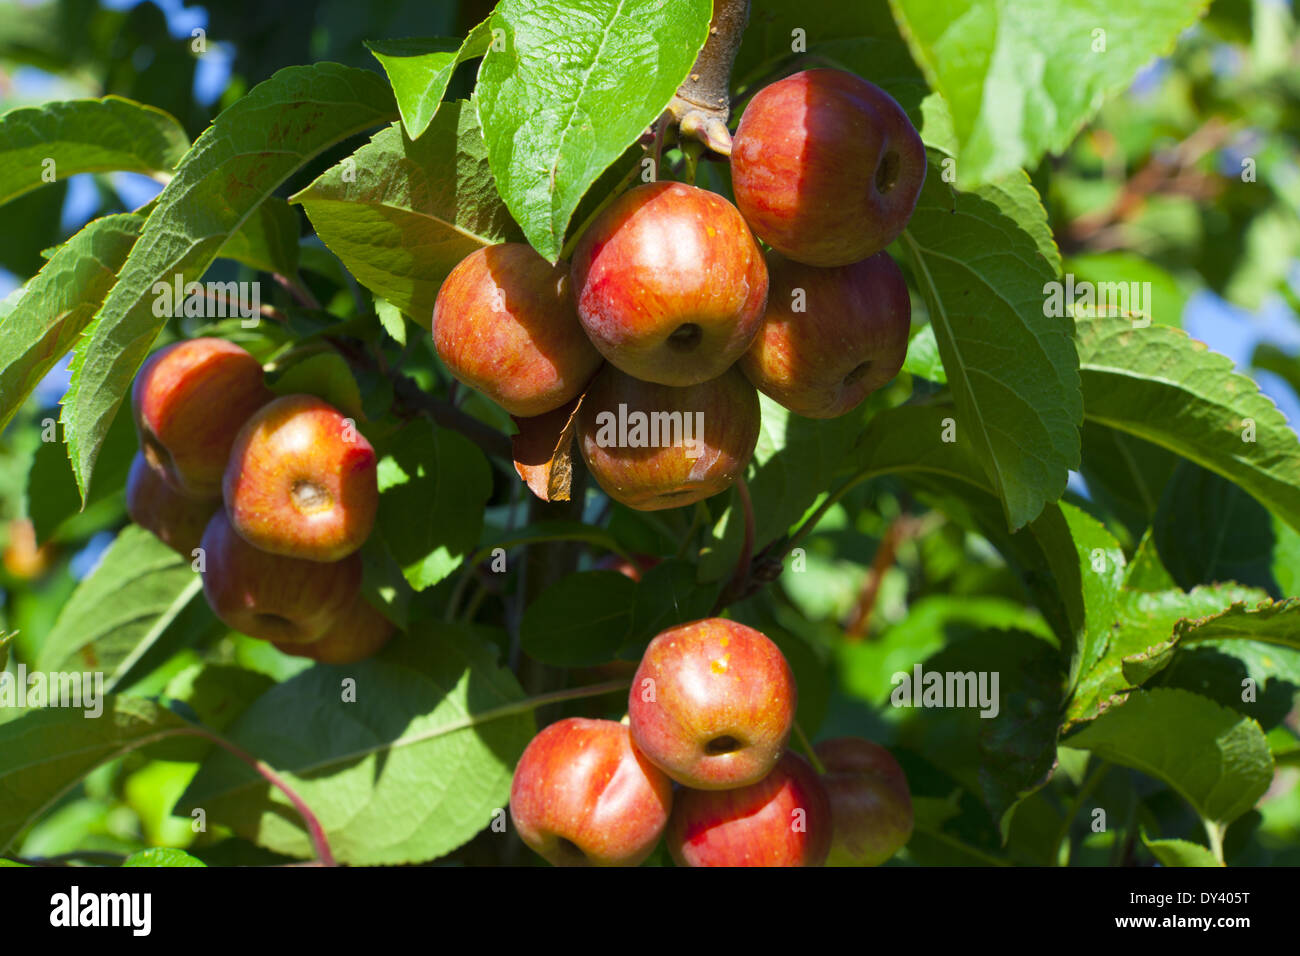 Many ripe crab apples hanging on the tree Stock Photo